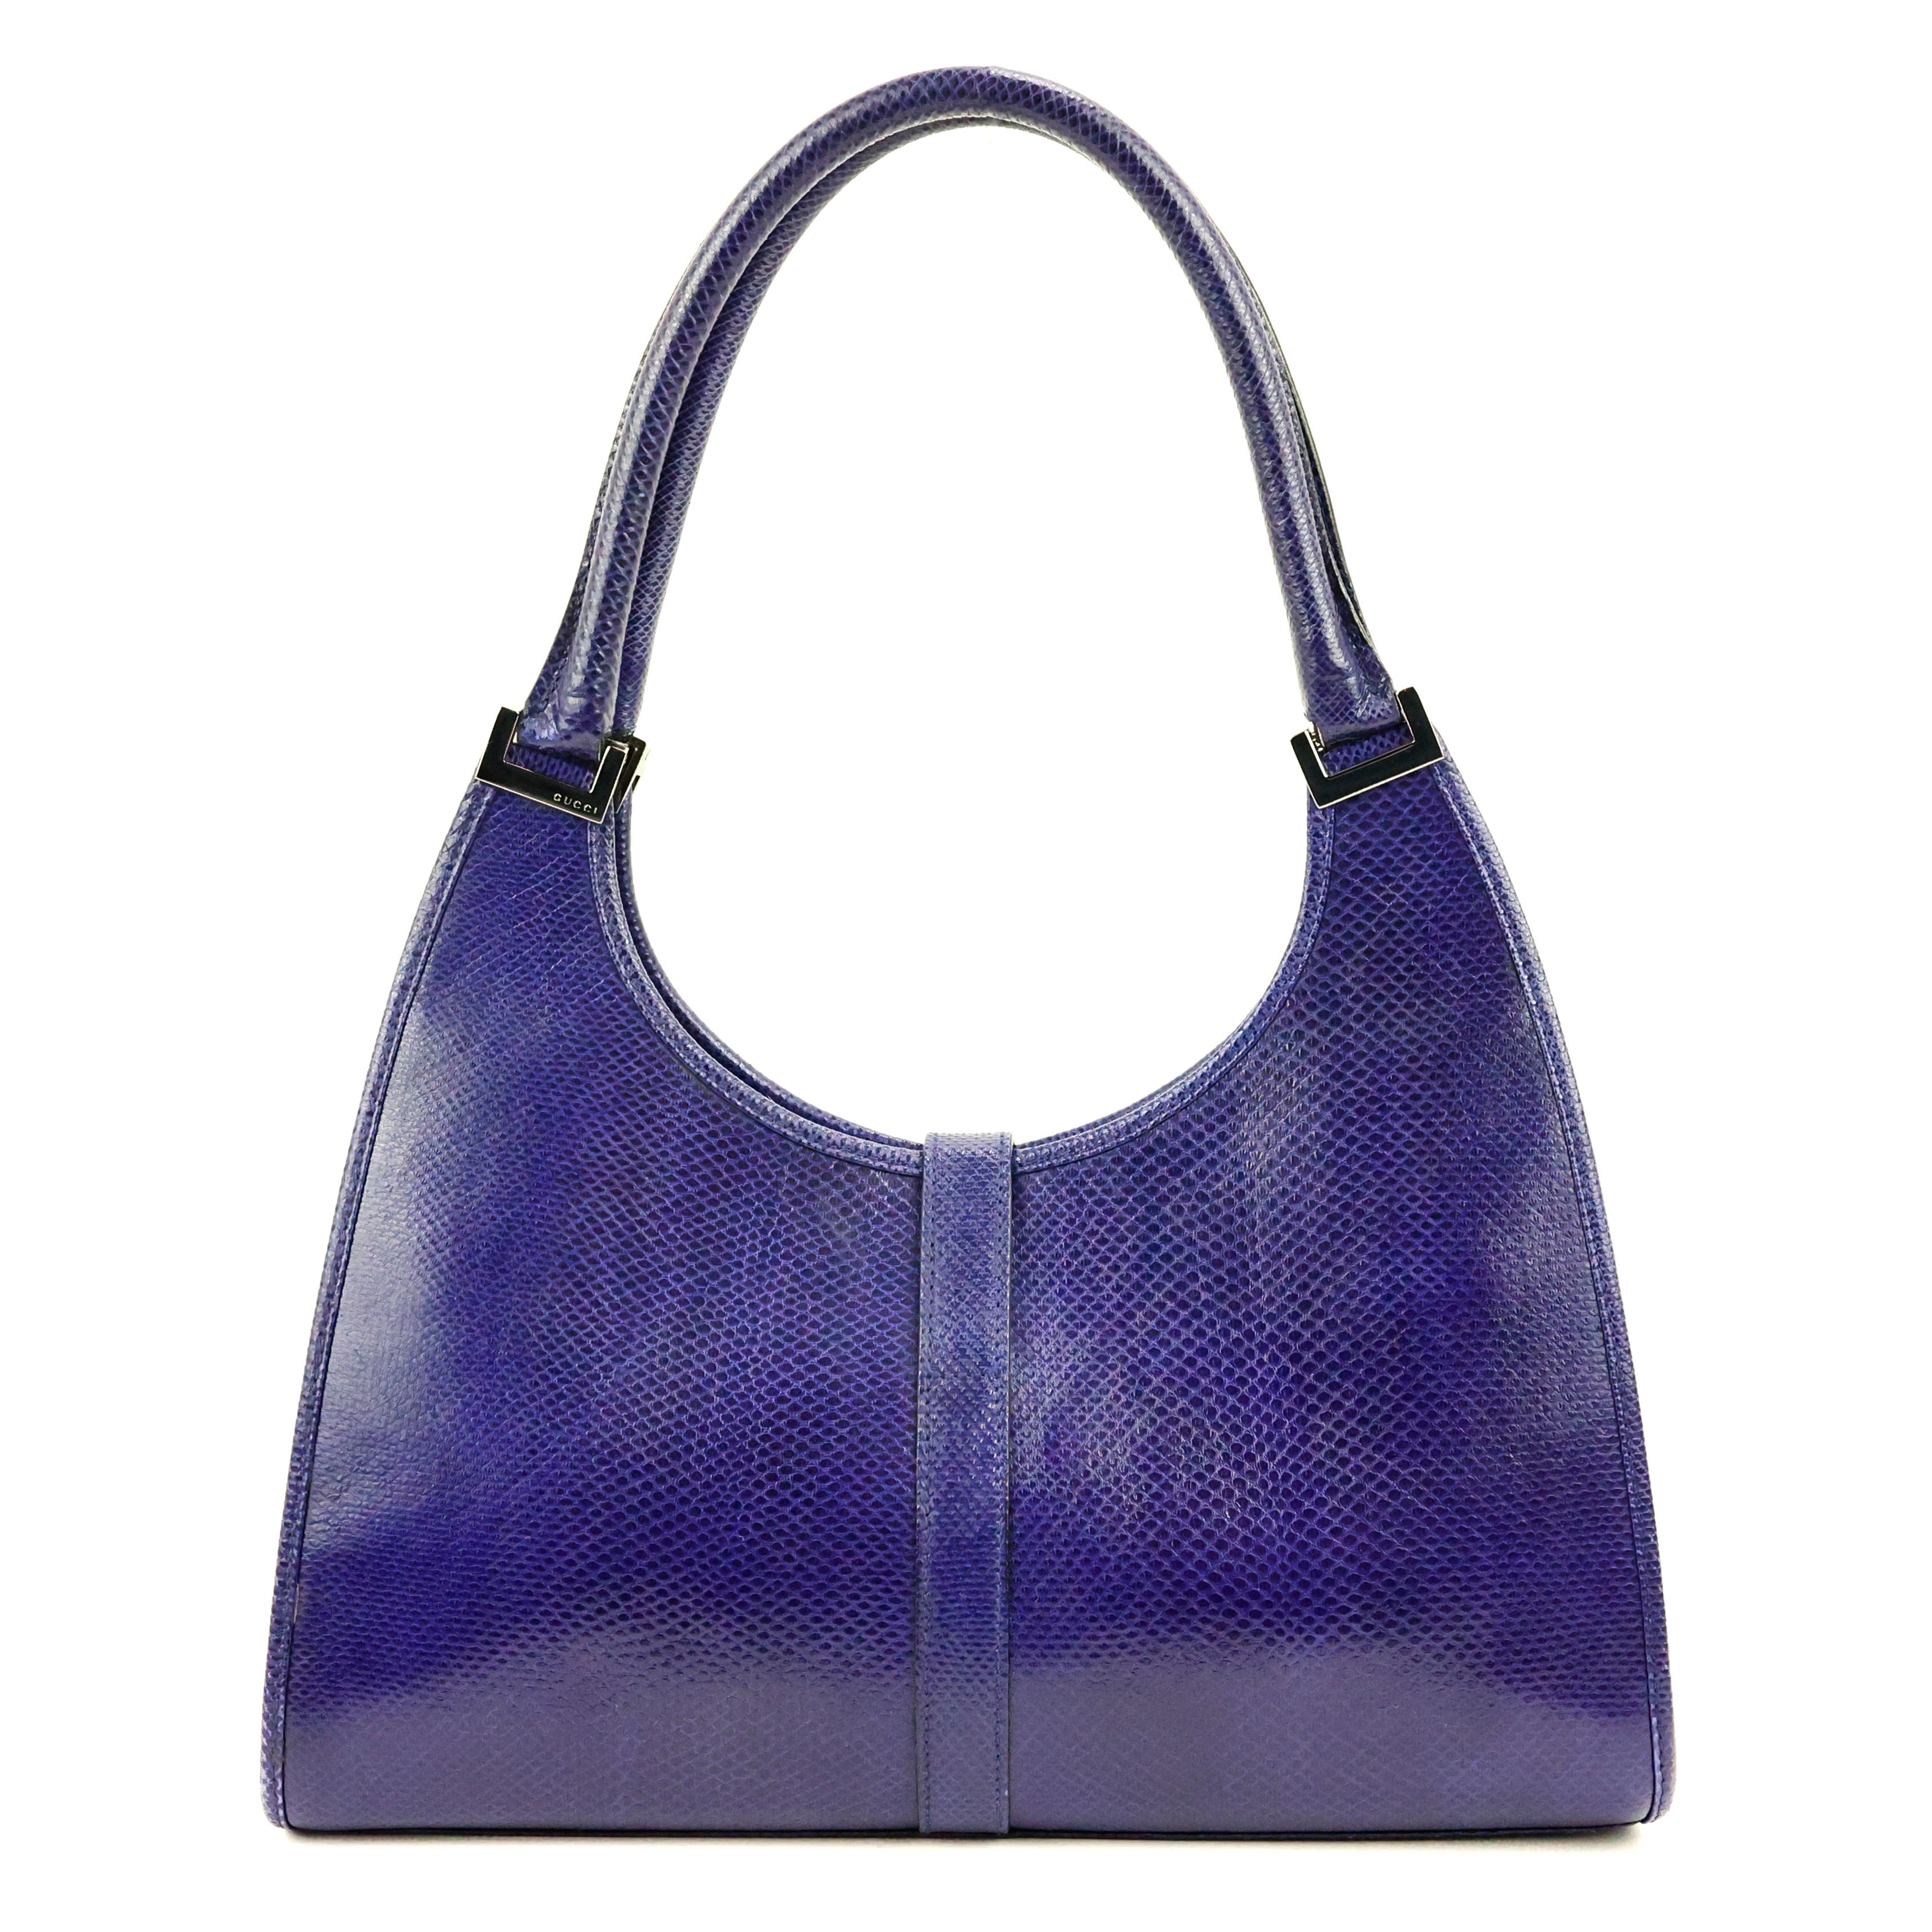 Gucci Jackie / Bardort bag in purple lizard leather, silver hardware.

Condition:
Really good.

Packing/accessories:
Dustbag, card.

Measurements:
31cm x 16cm x 11cm
